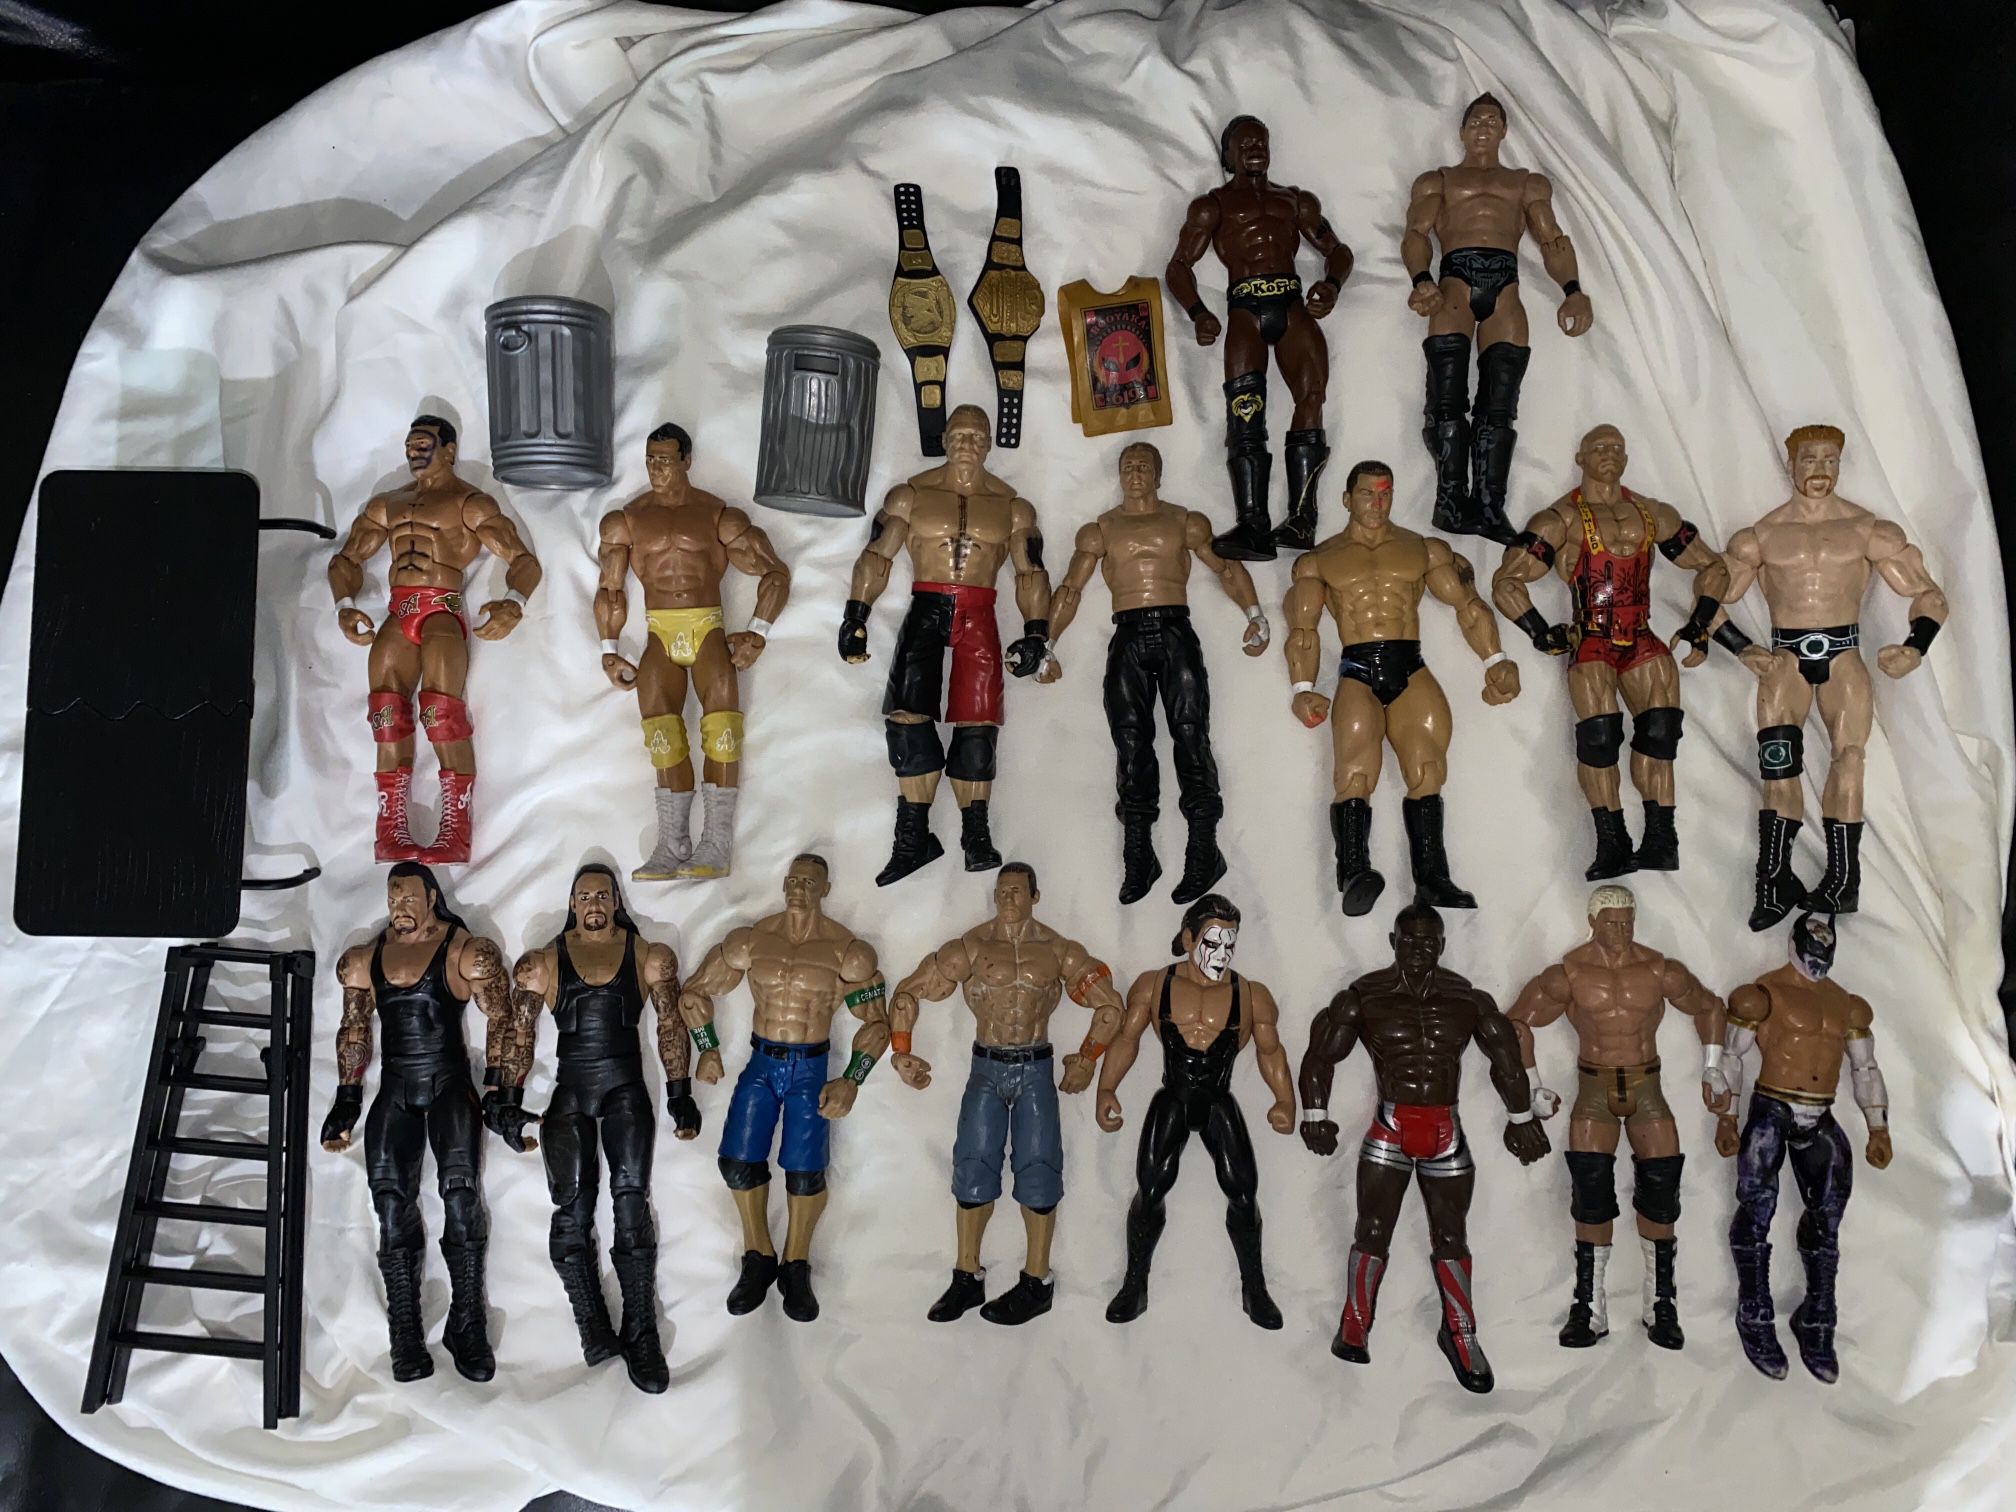 17 2010 WWE ACTION FIGURES VERY RARE!